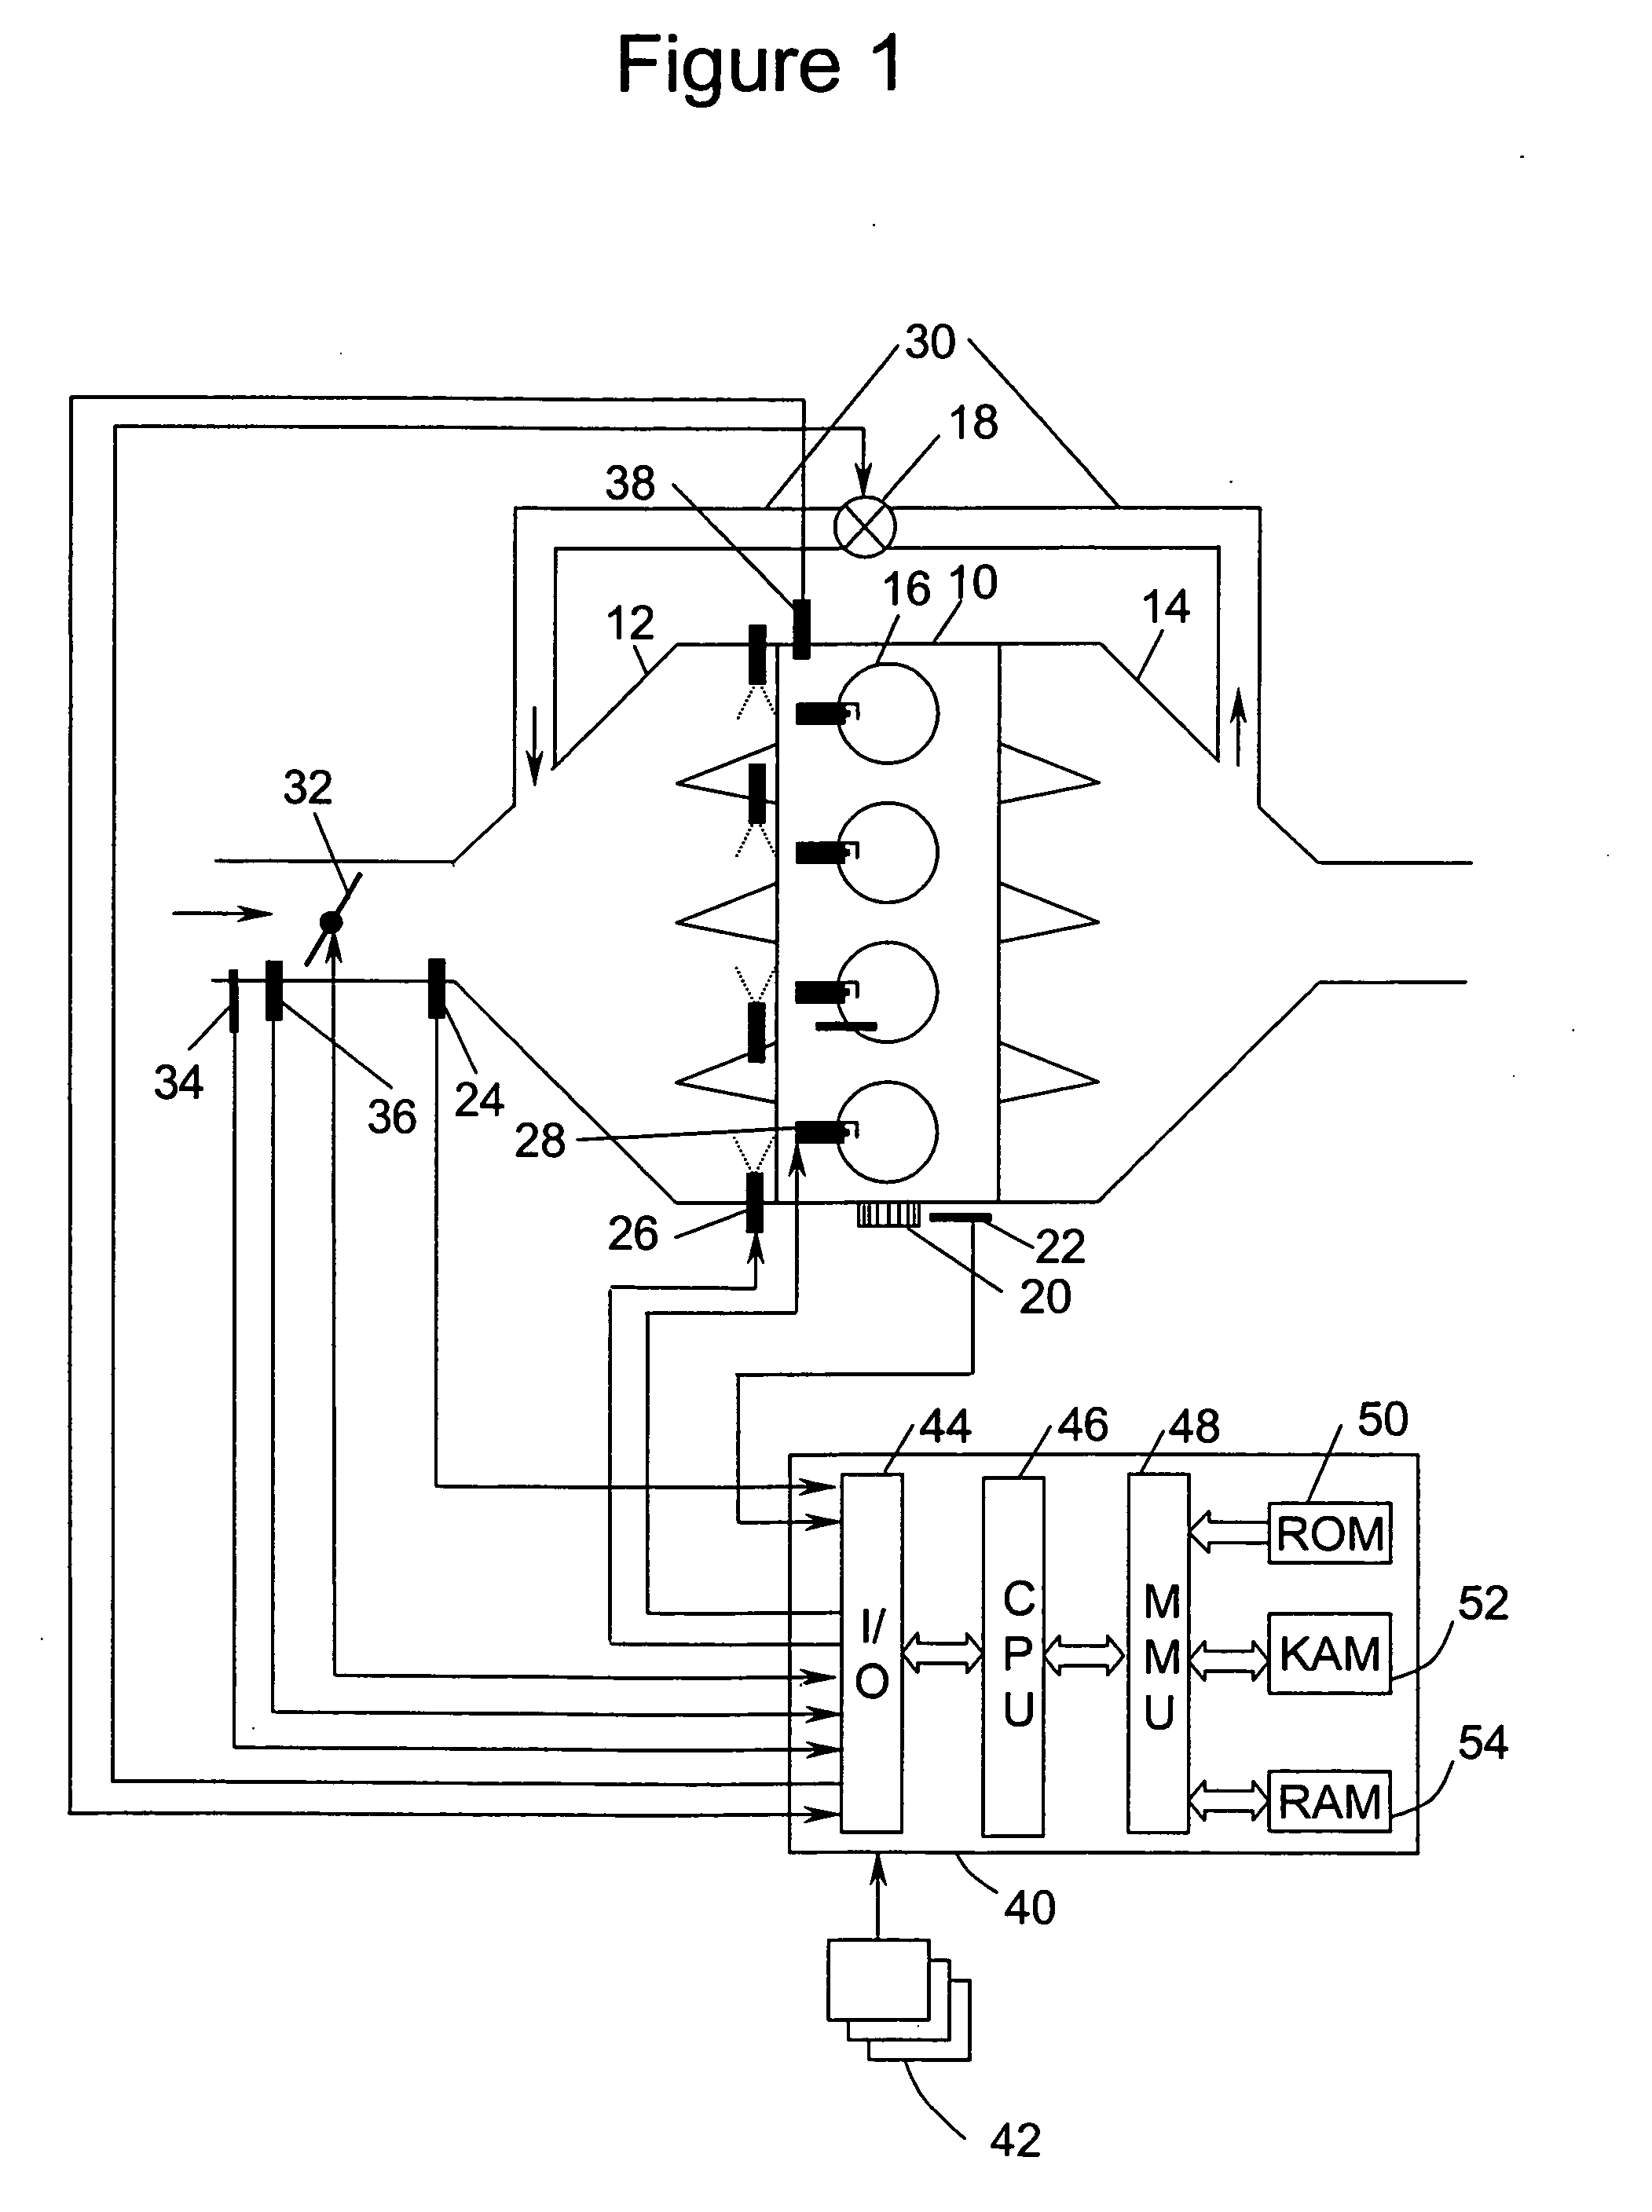 Method for operating a lean burn engine with an aftertreatment system including nonthermal plasma discharge device